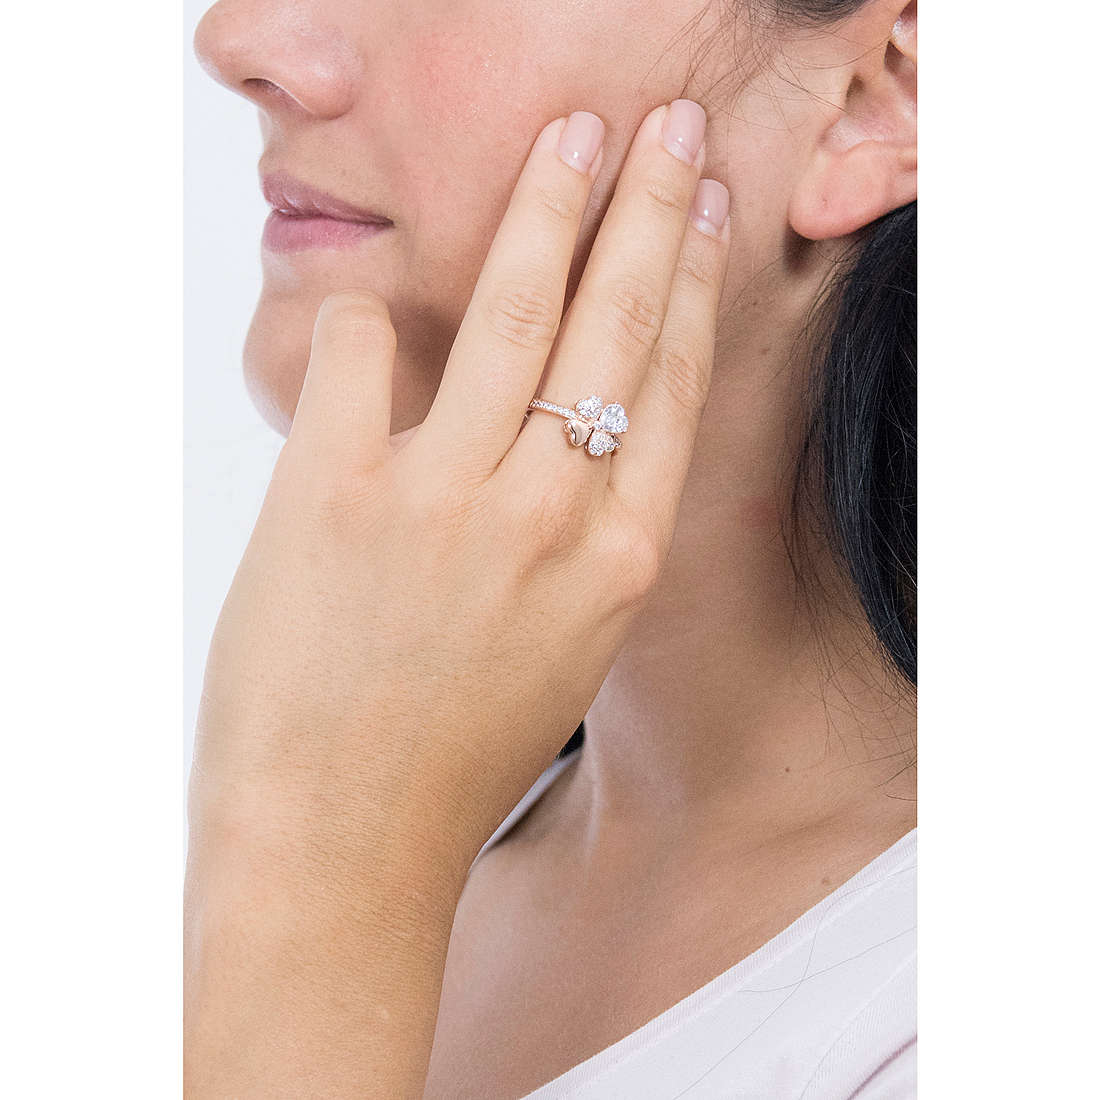 Amen rings Amore woman RQURB-12 wearing